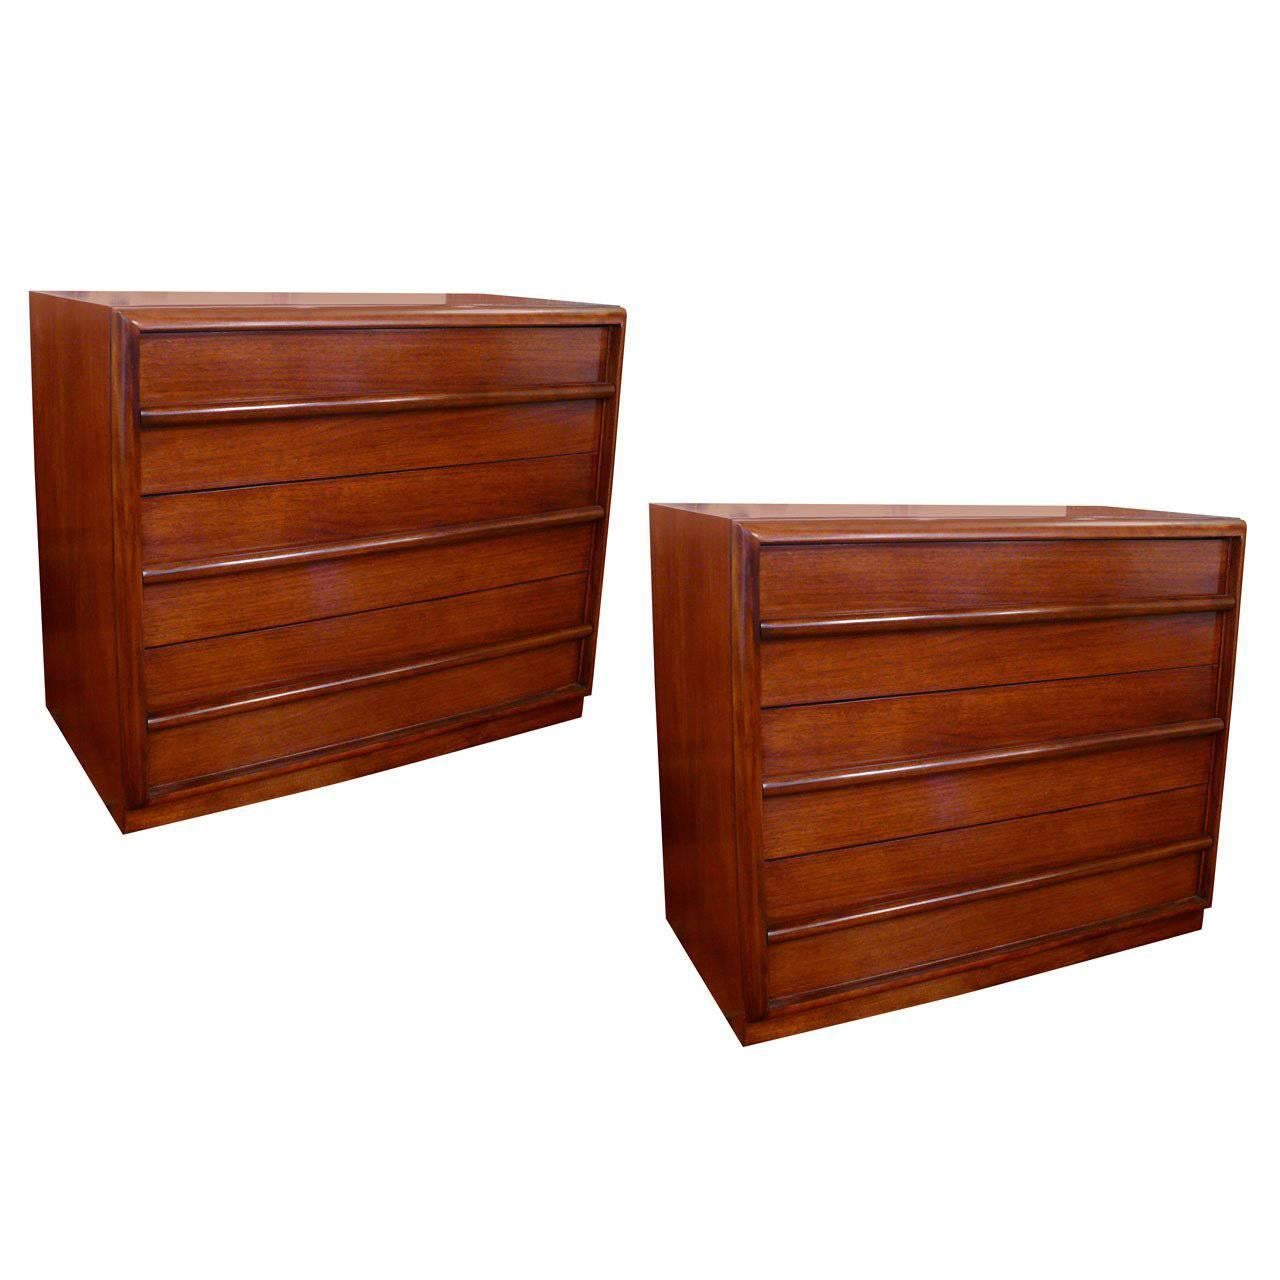 Pair  Three-Drawer Chests  or Dressers by T.H. Robsjohn-Gibbings